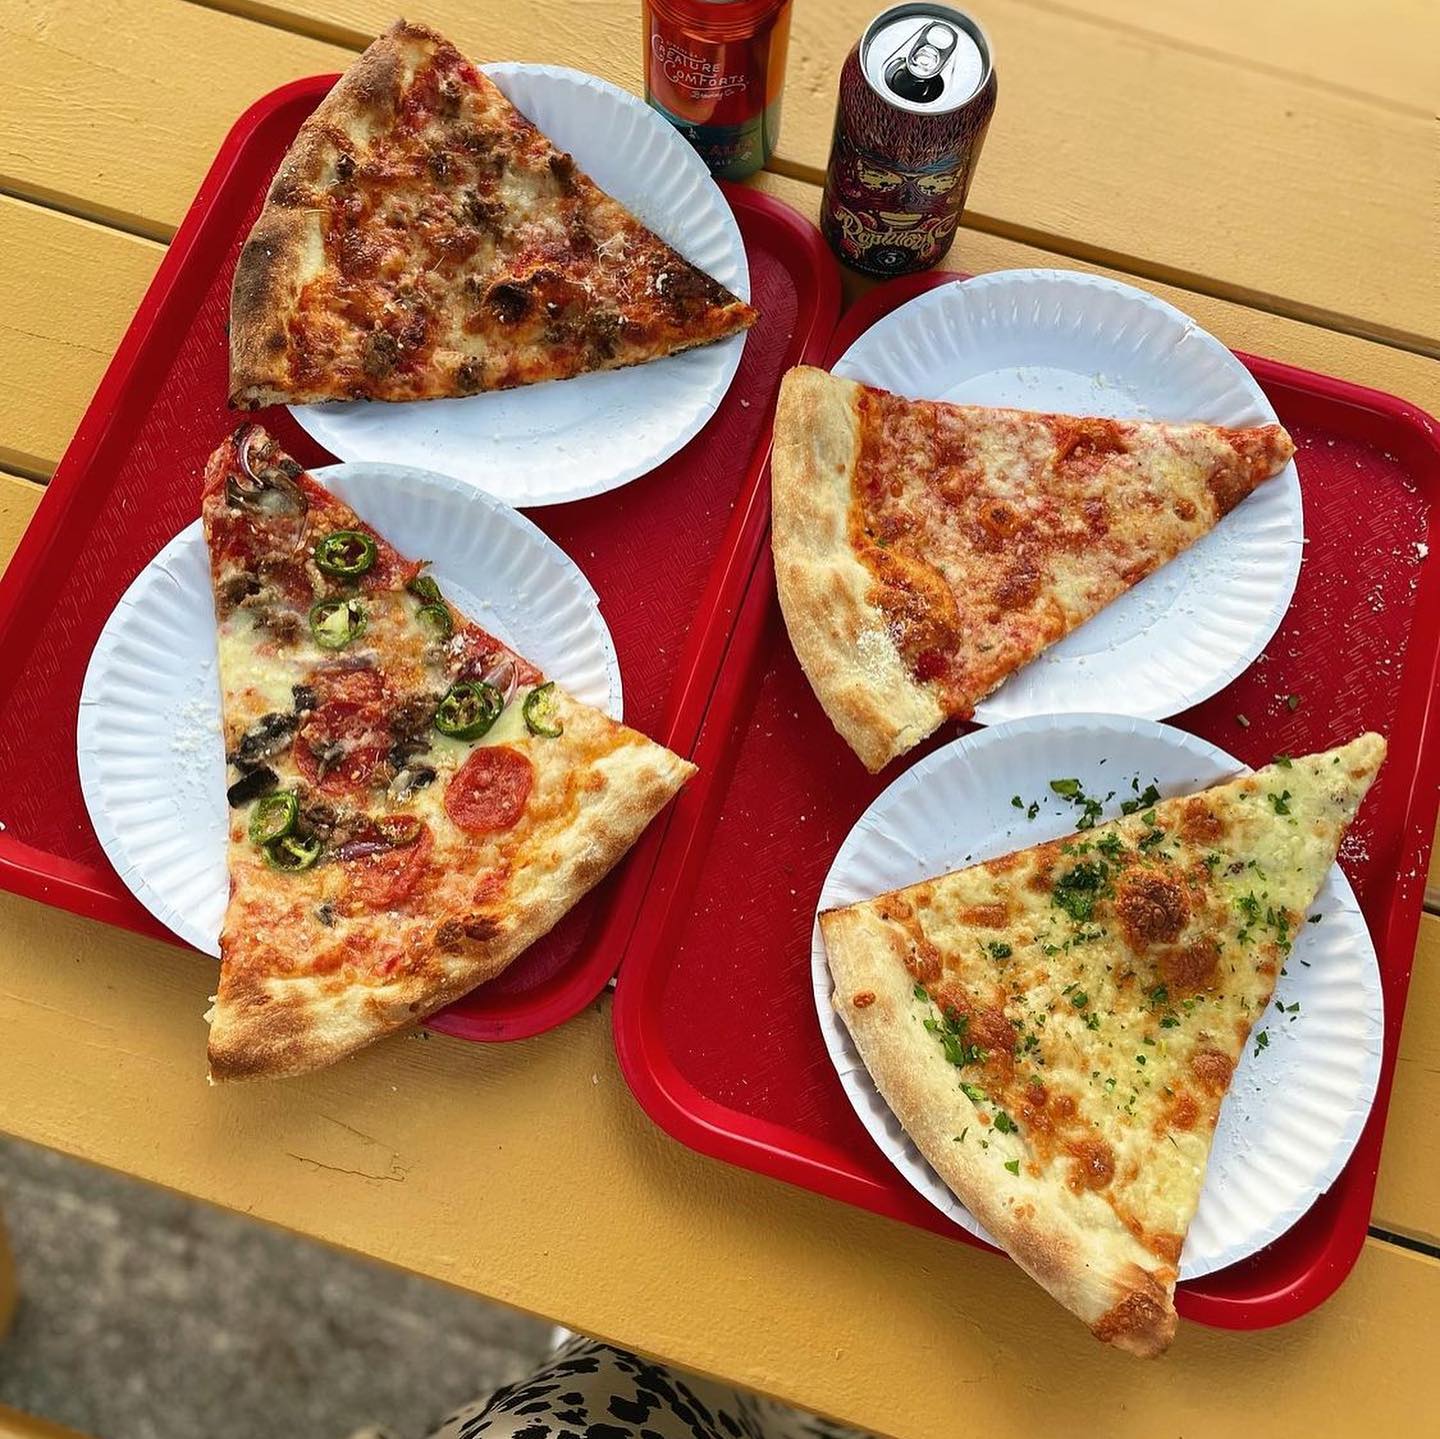 Four slices of pizza (sausage and onion, pepperoni and jalapenos, cheese, and garlic) sit on white paper plates on a red tray beside a two cans of beer.